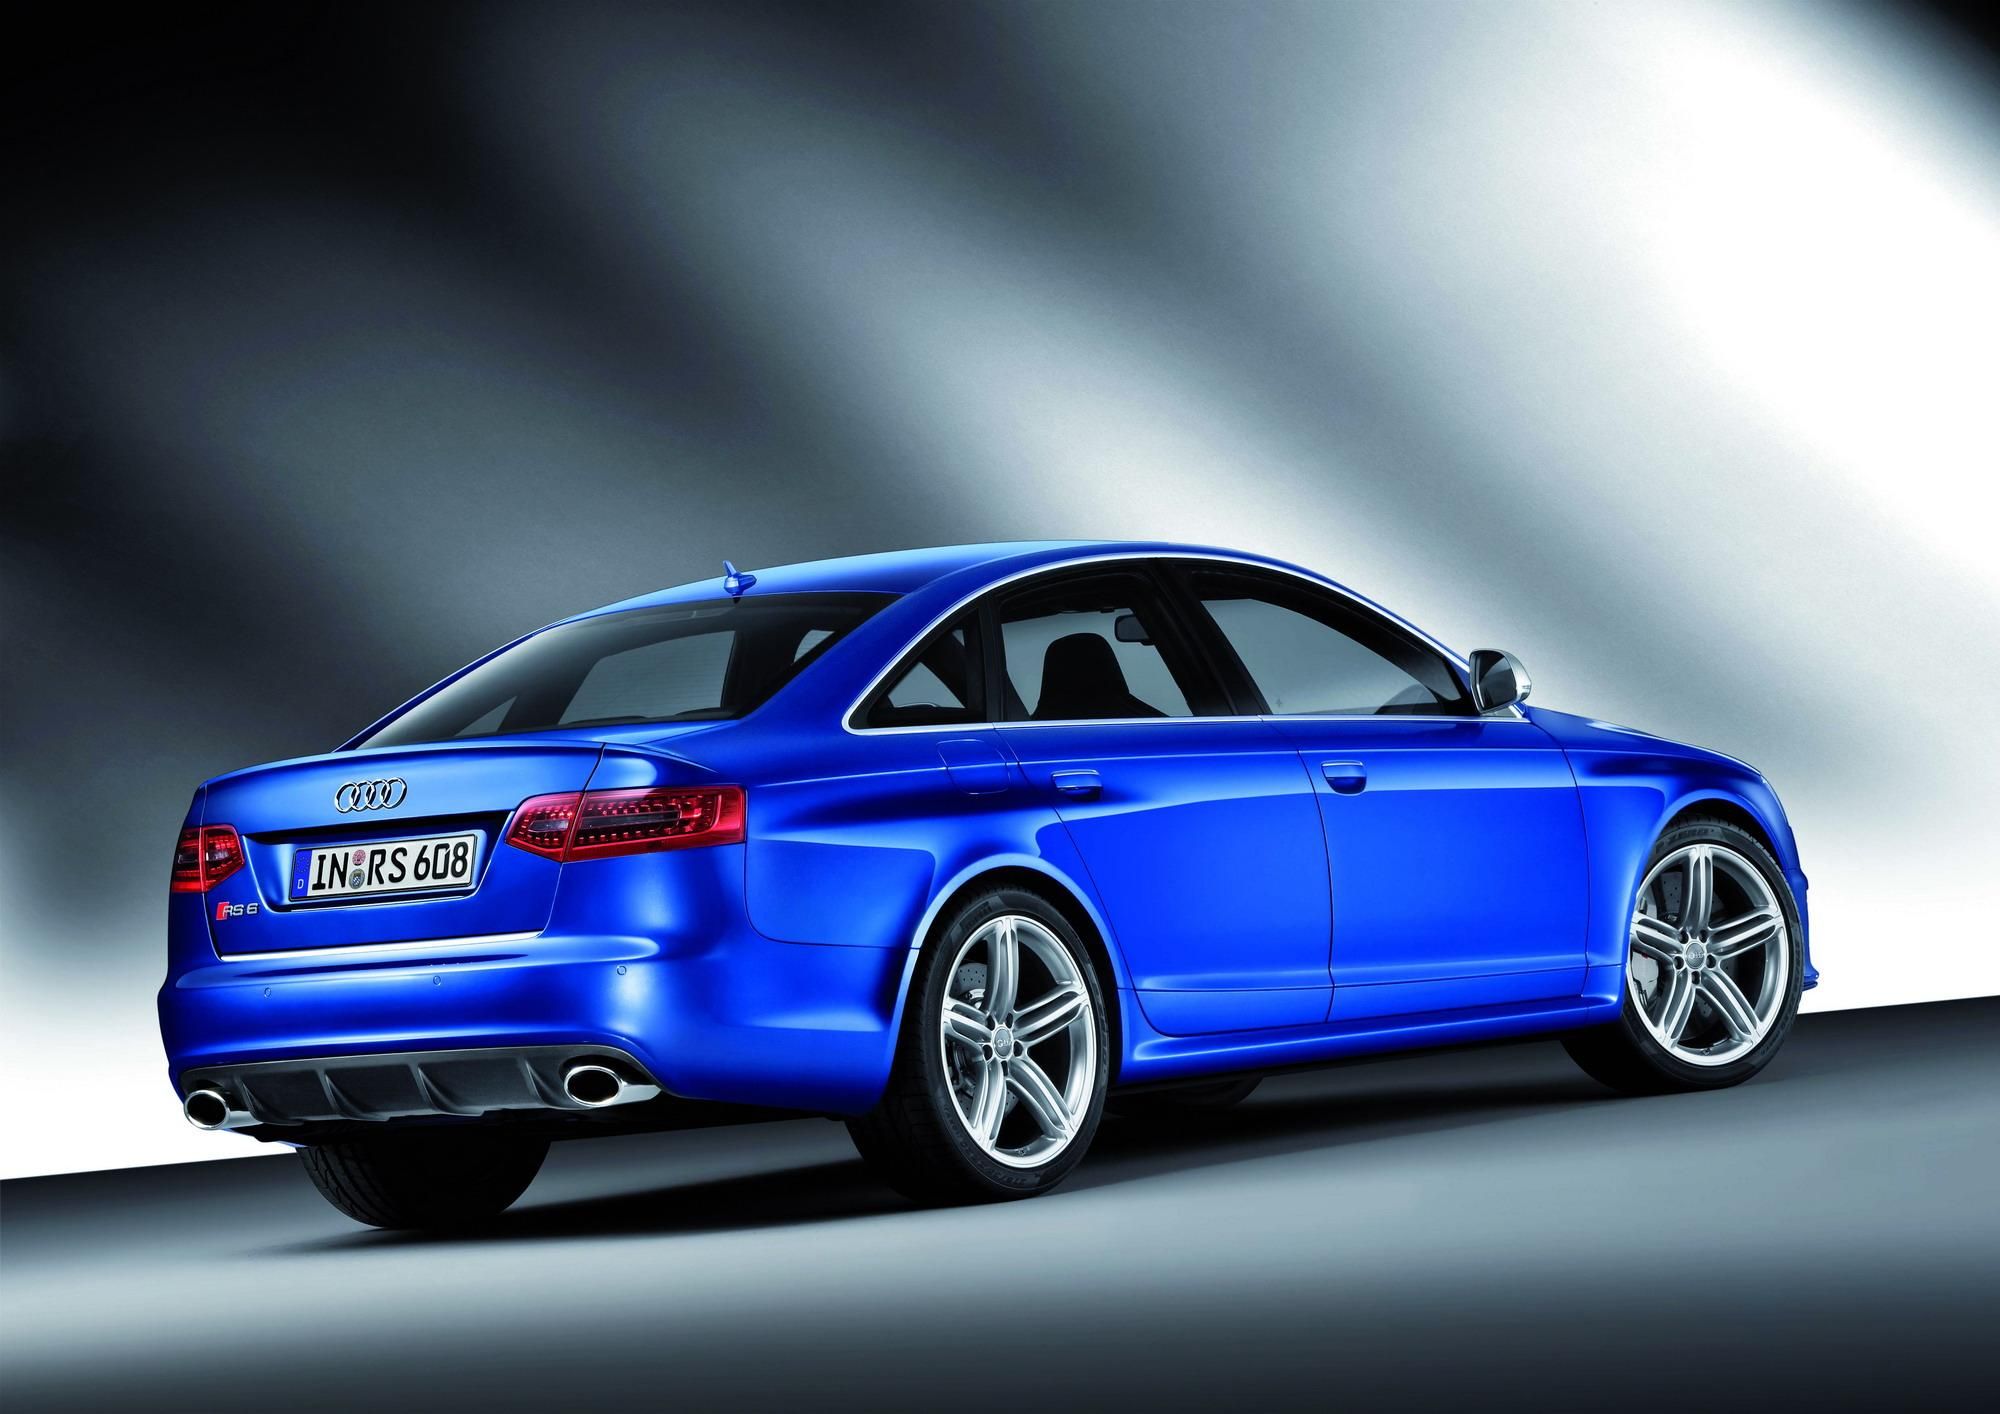 2010 Audi RS6 Plus Sport and RS6 Plus Audi exclusive